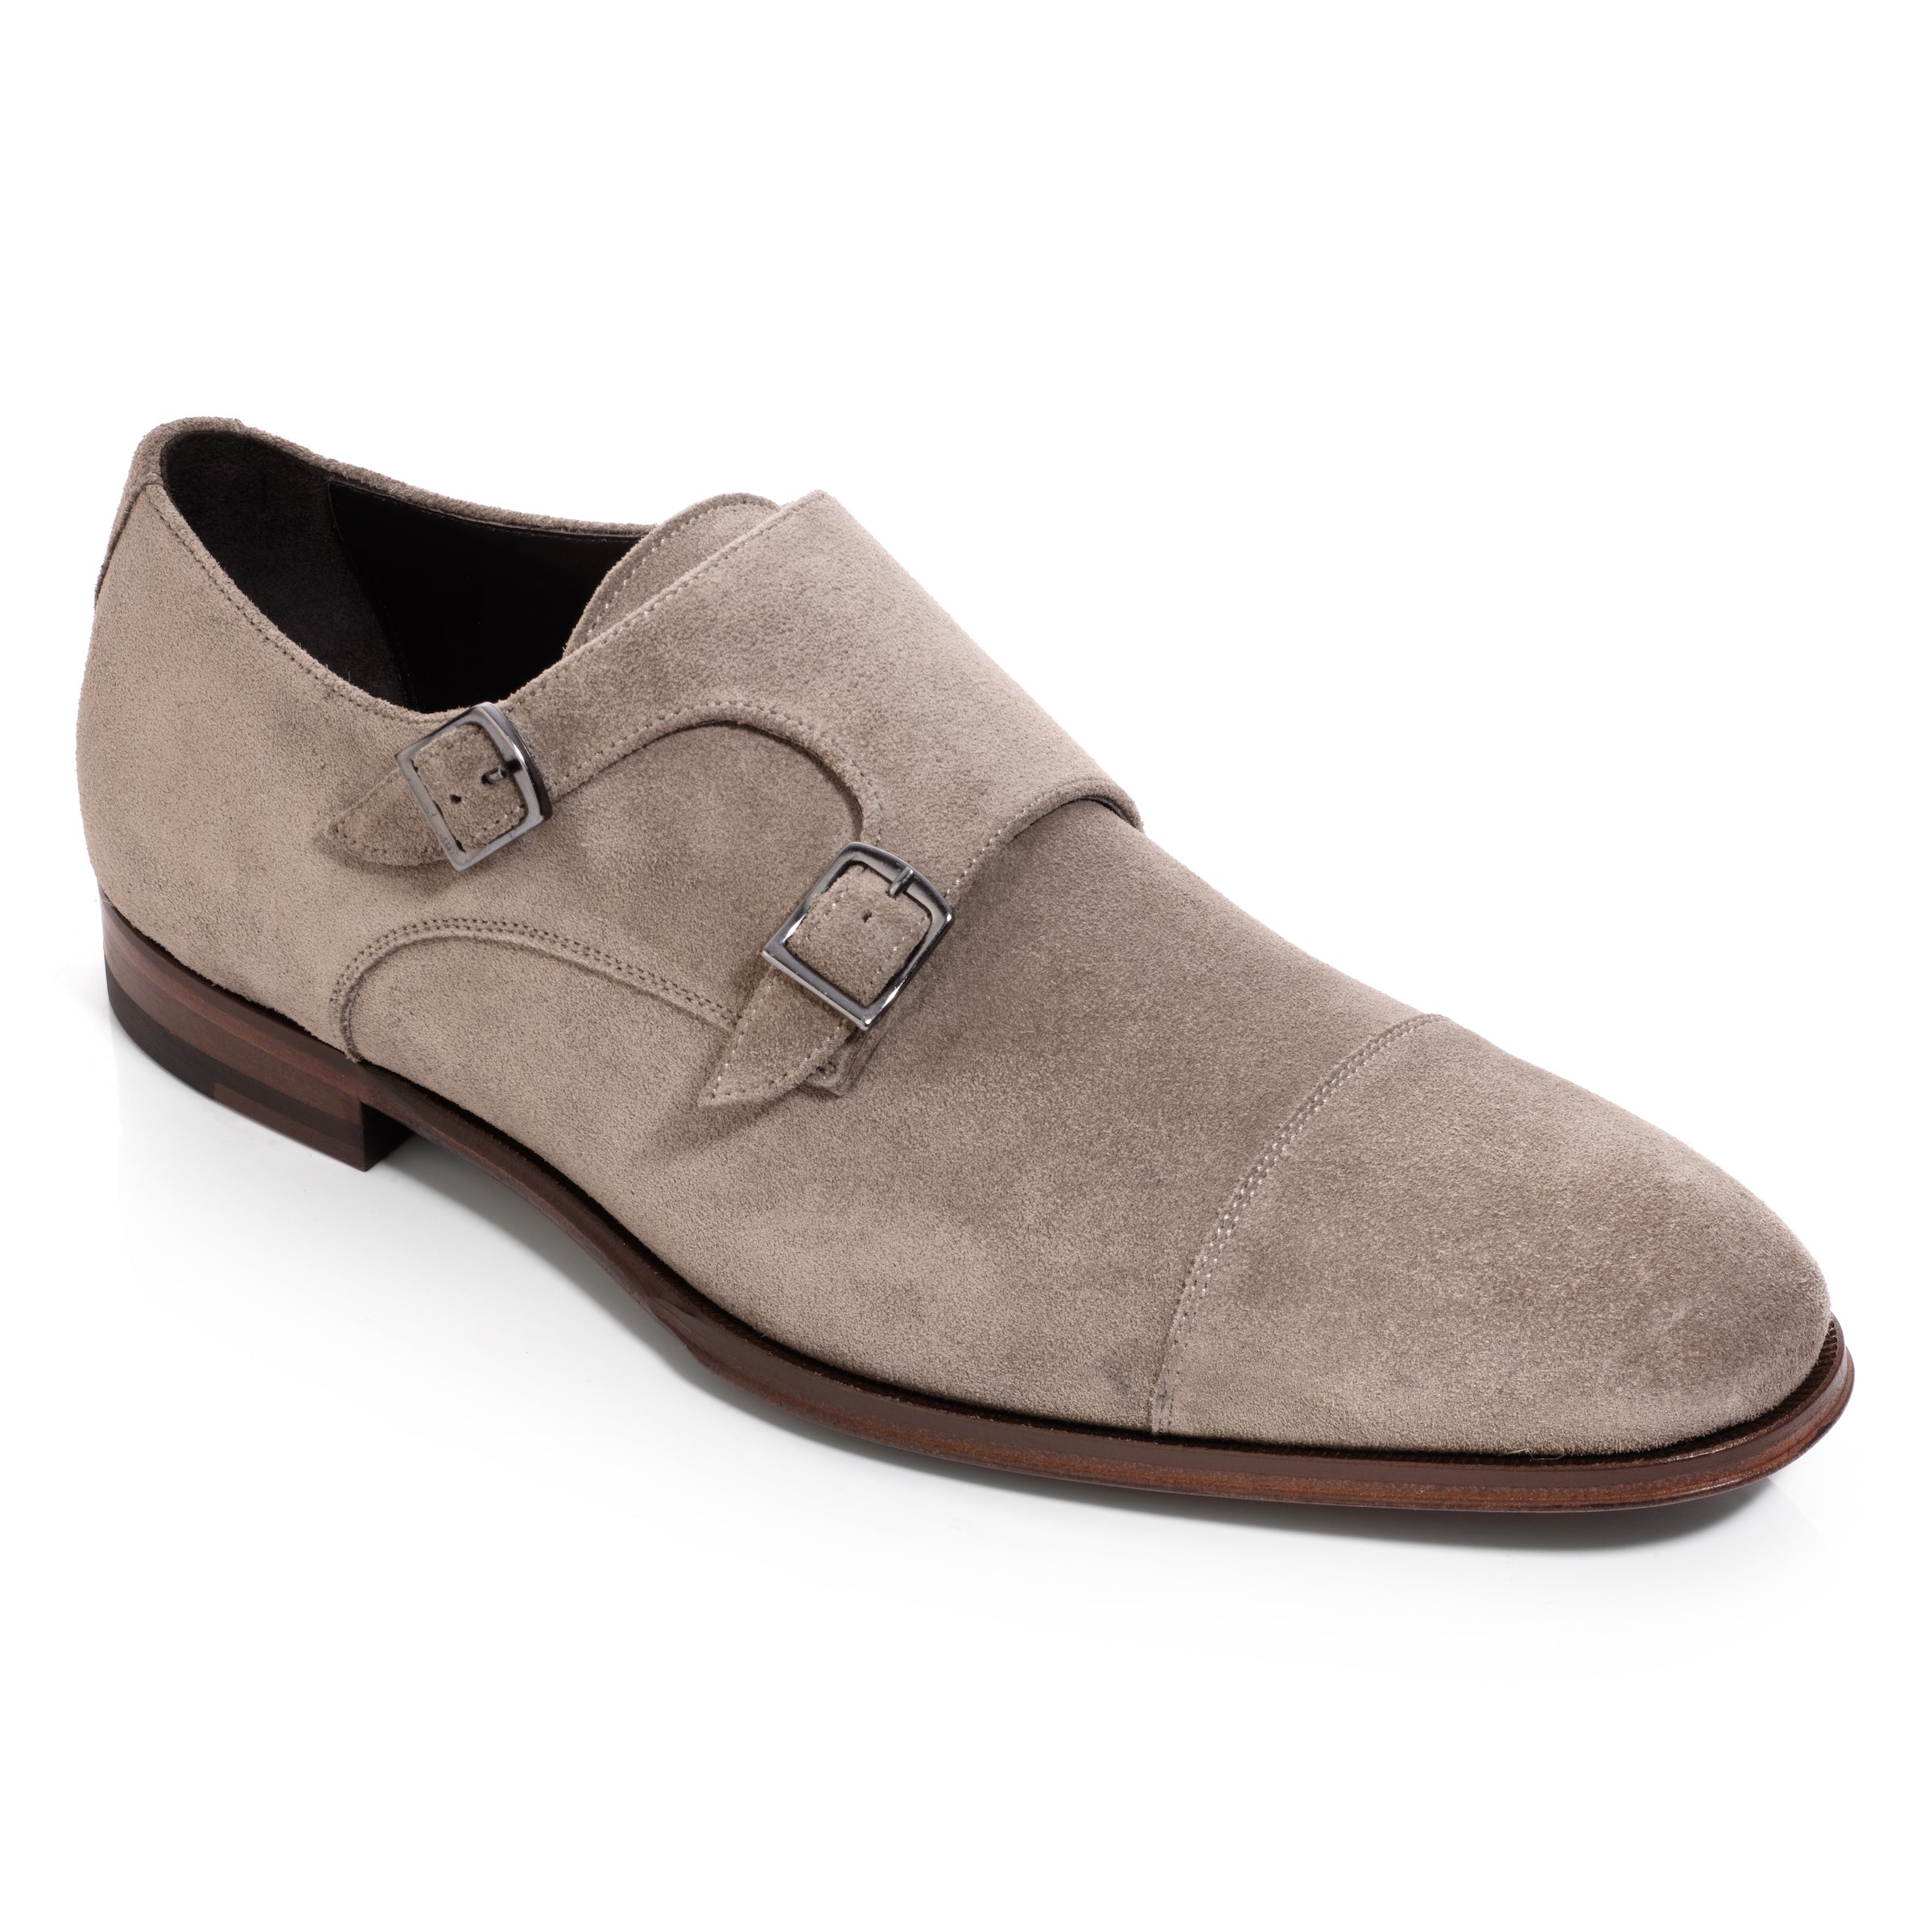 Addison Taupe Suede Double Buckle Monkstrap